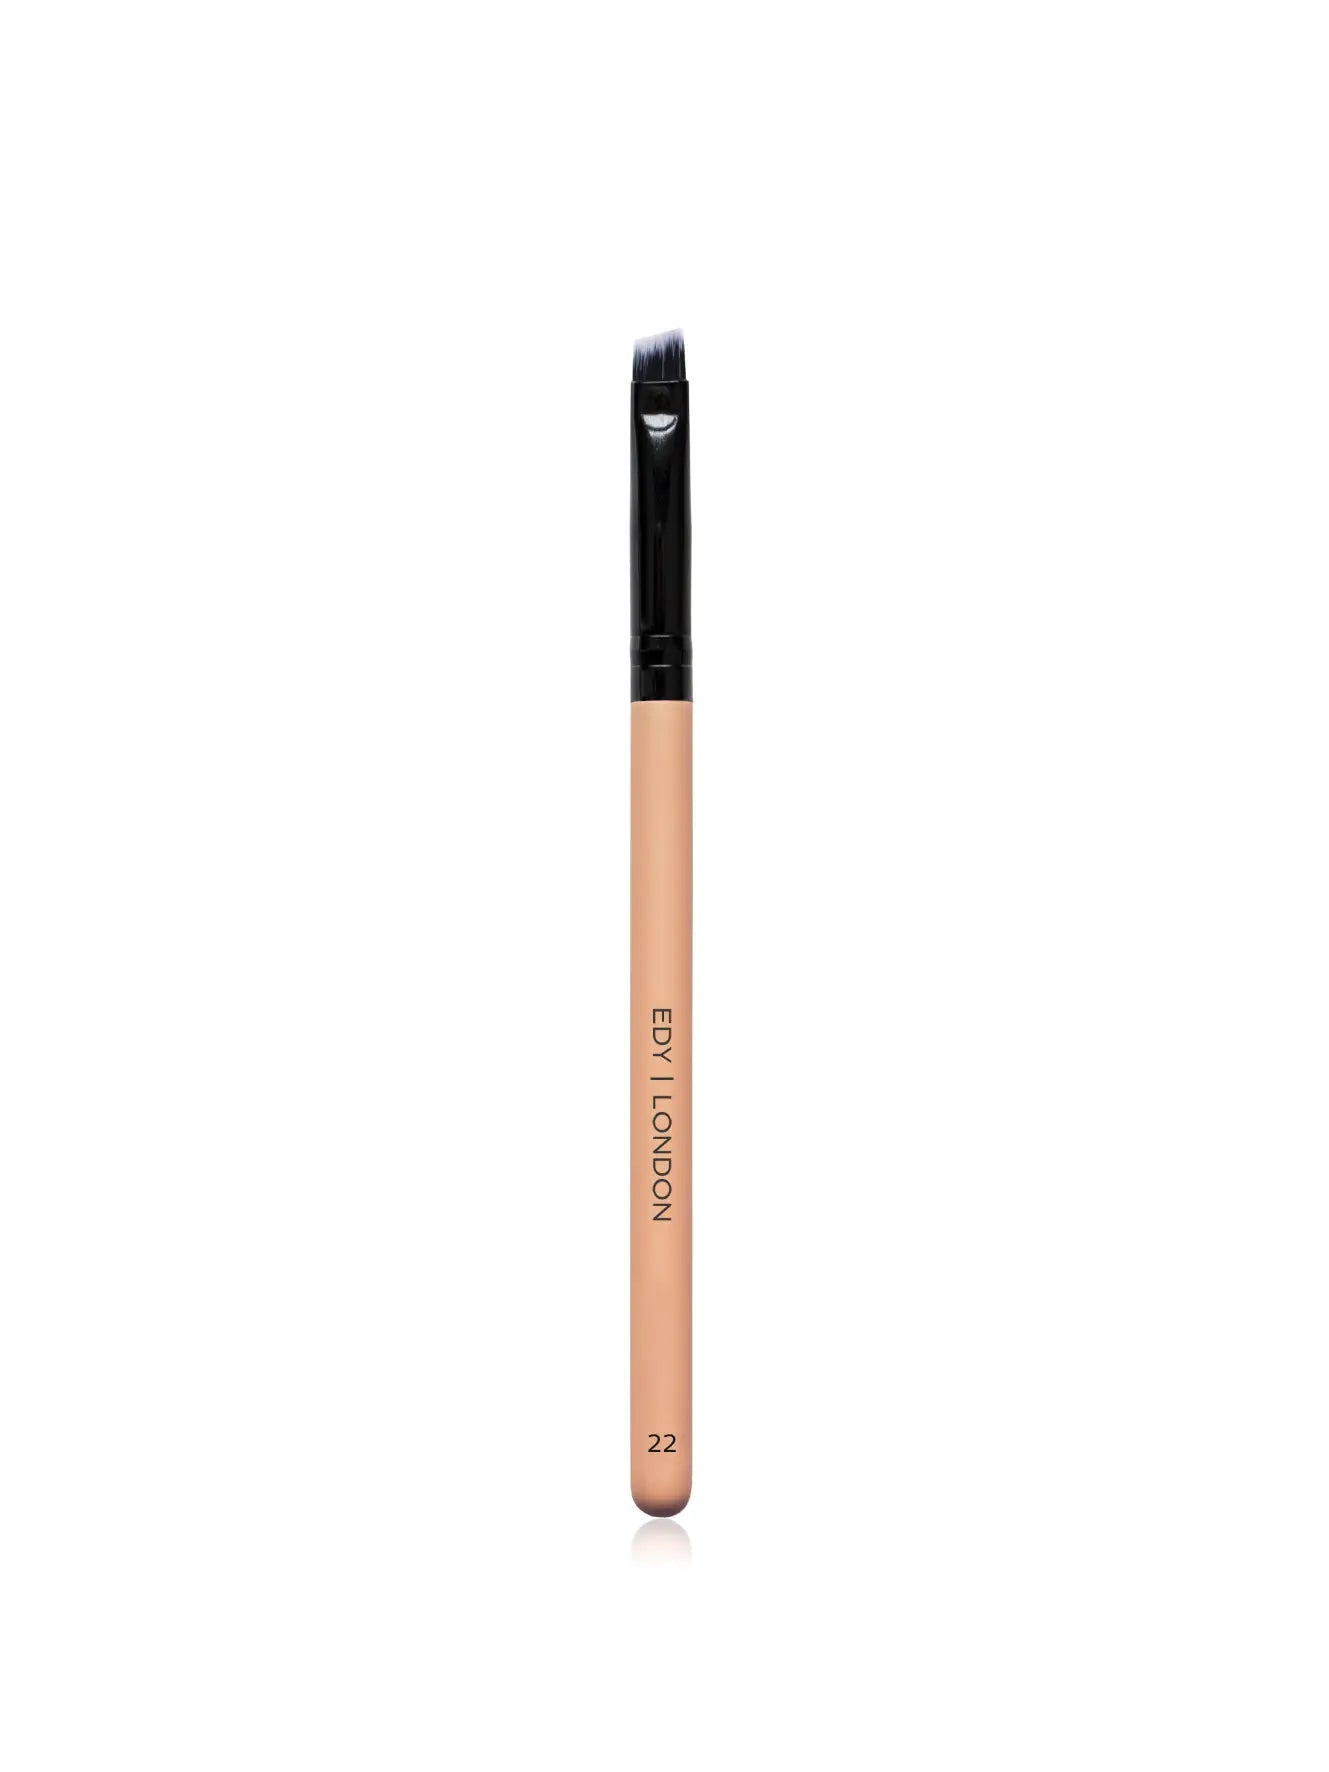 Angled Brow Brush 22 Make-up Brush EDY LONDON Pale Pink   - EDY LONDON PRODUCTS UK - The Best Makeup Brushes - shop.edy.london